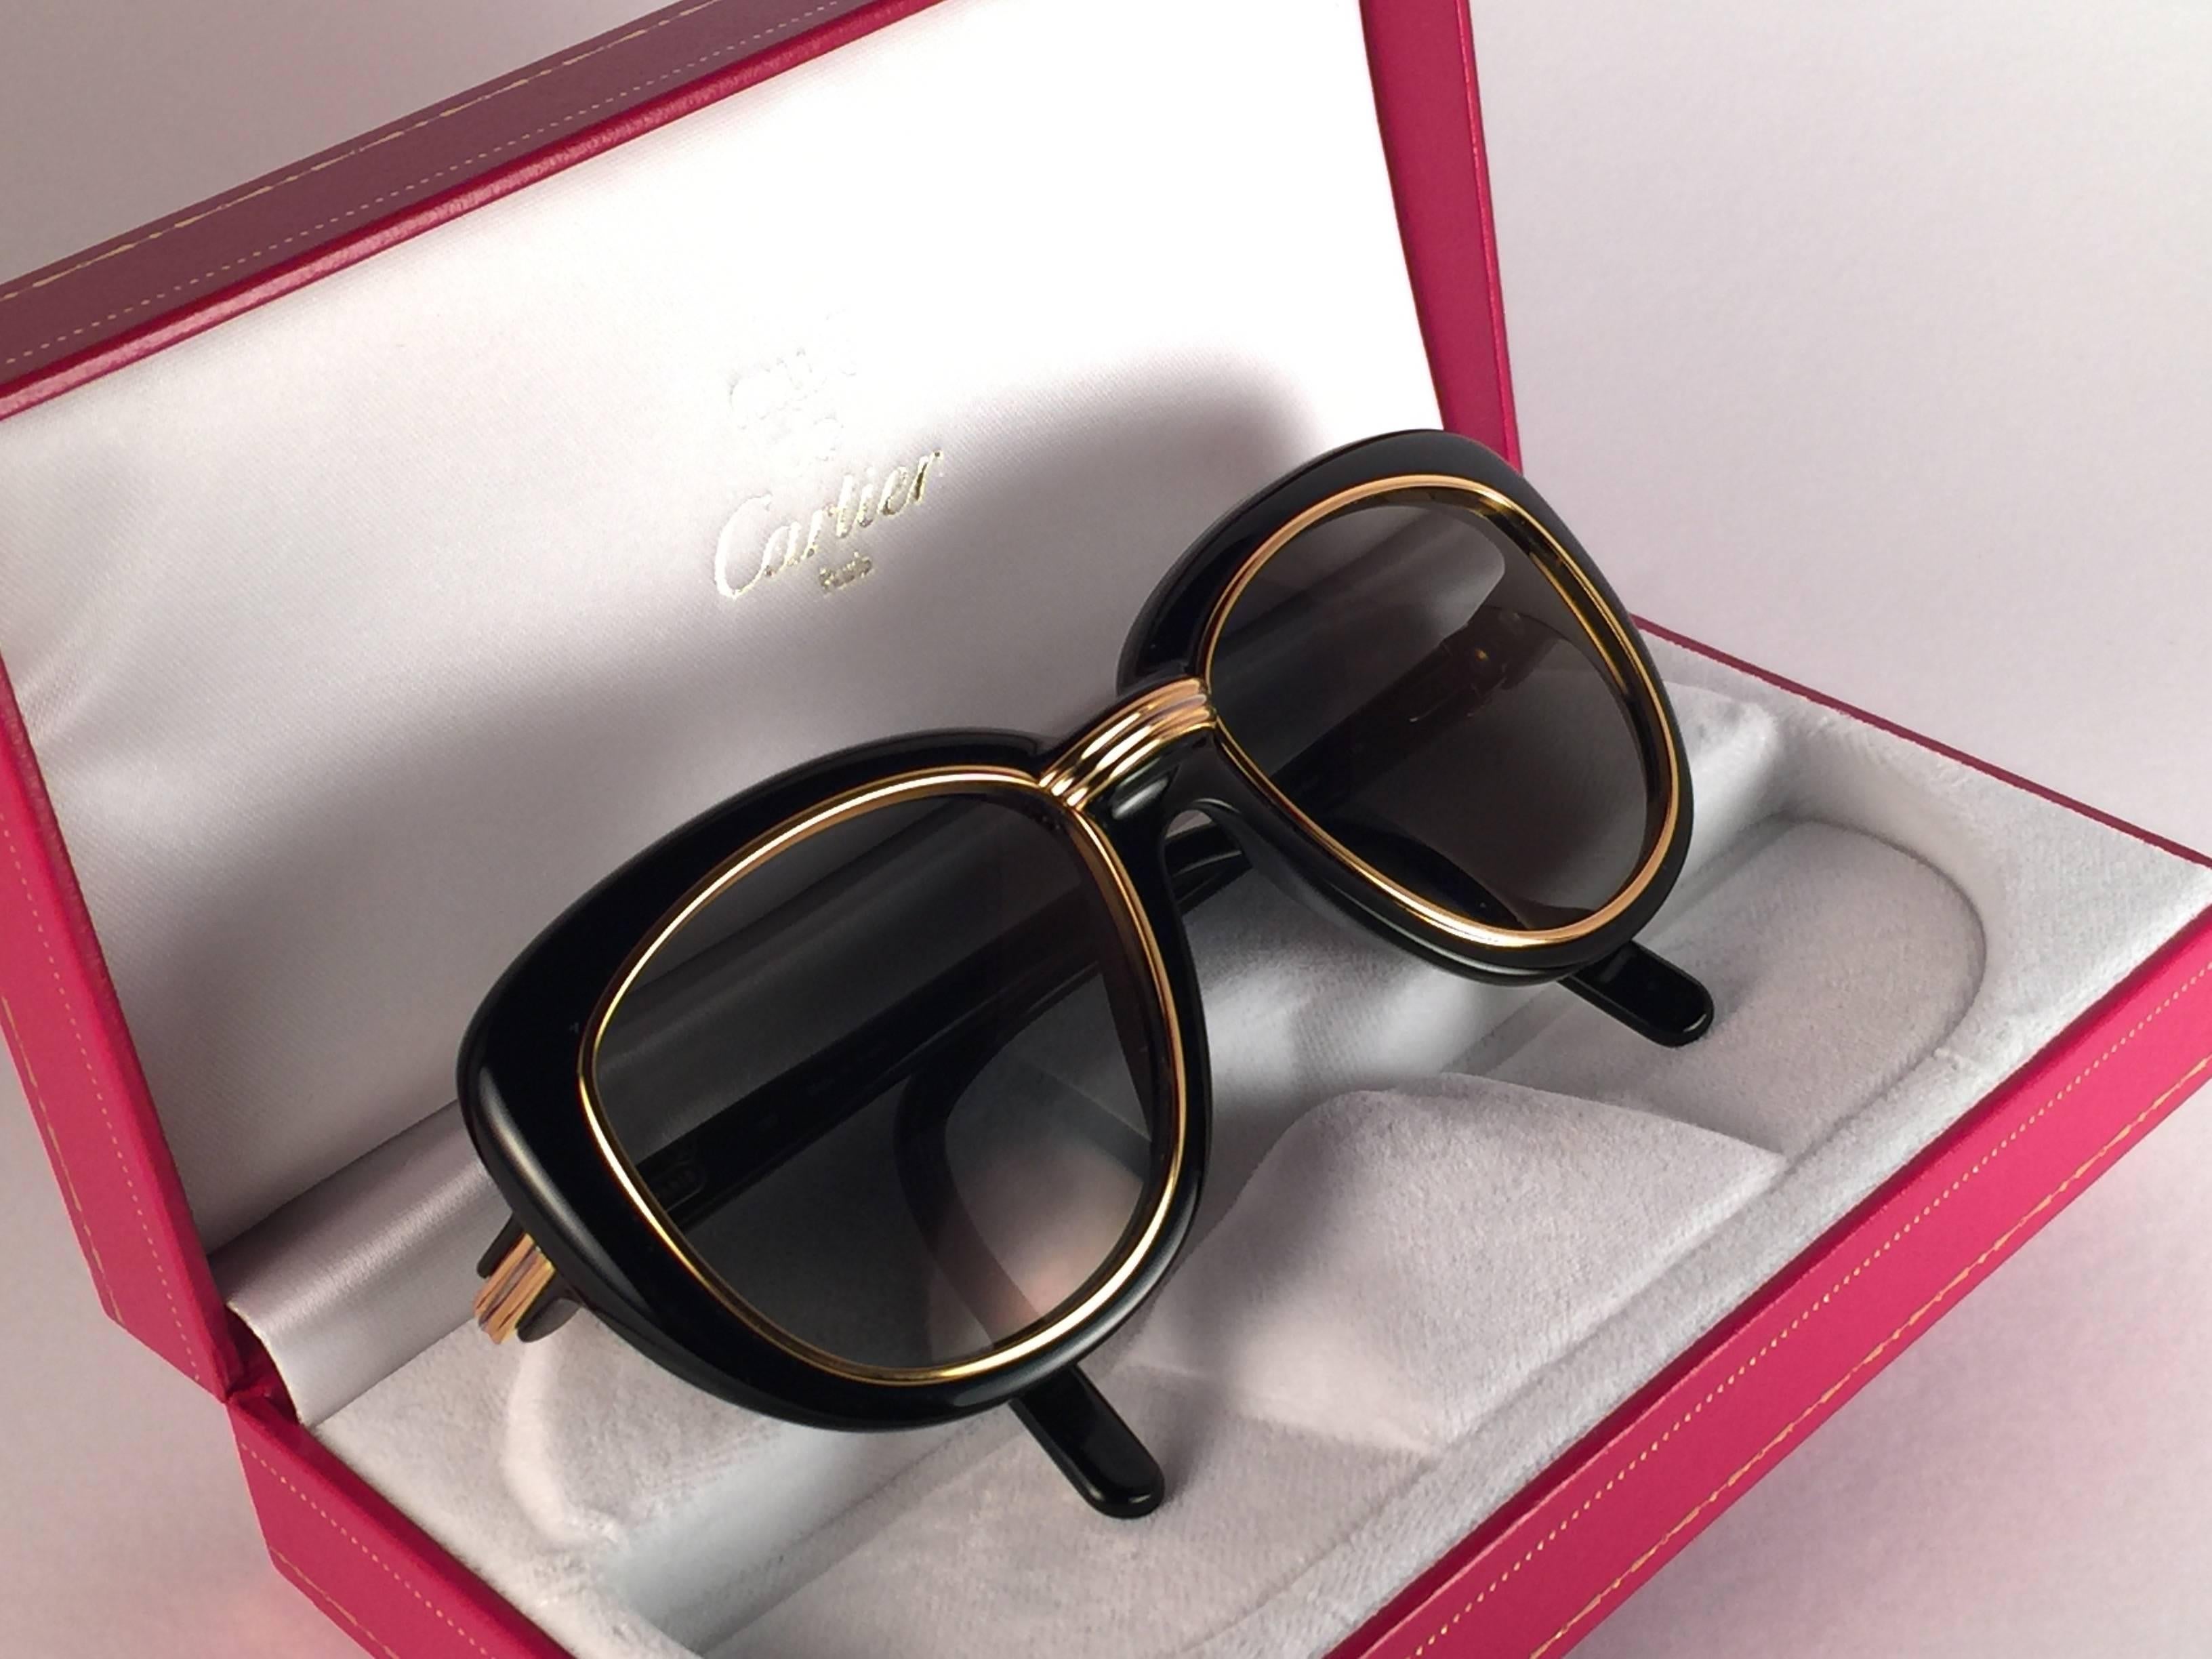 New Cartier Conquete Sunglasses with grey slight gold mirror Cartier (uv protection) lenses. Yellow and white gold inserts and accents.  All hallmarks.  Both arms sport the C from Cartier on the temple.  These are like a pair of jewels on your nose